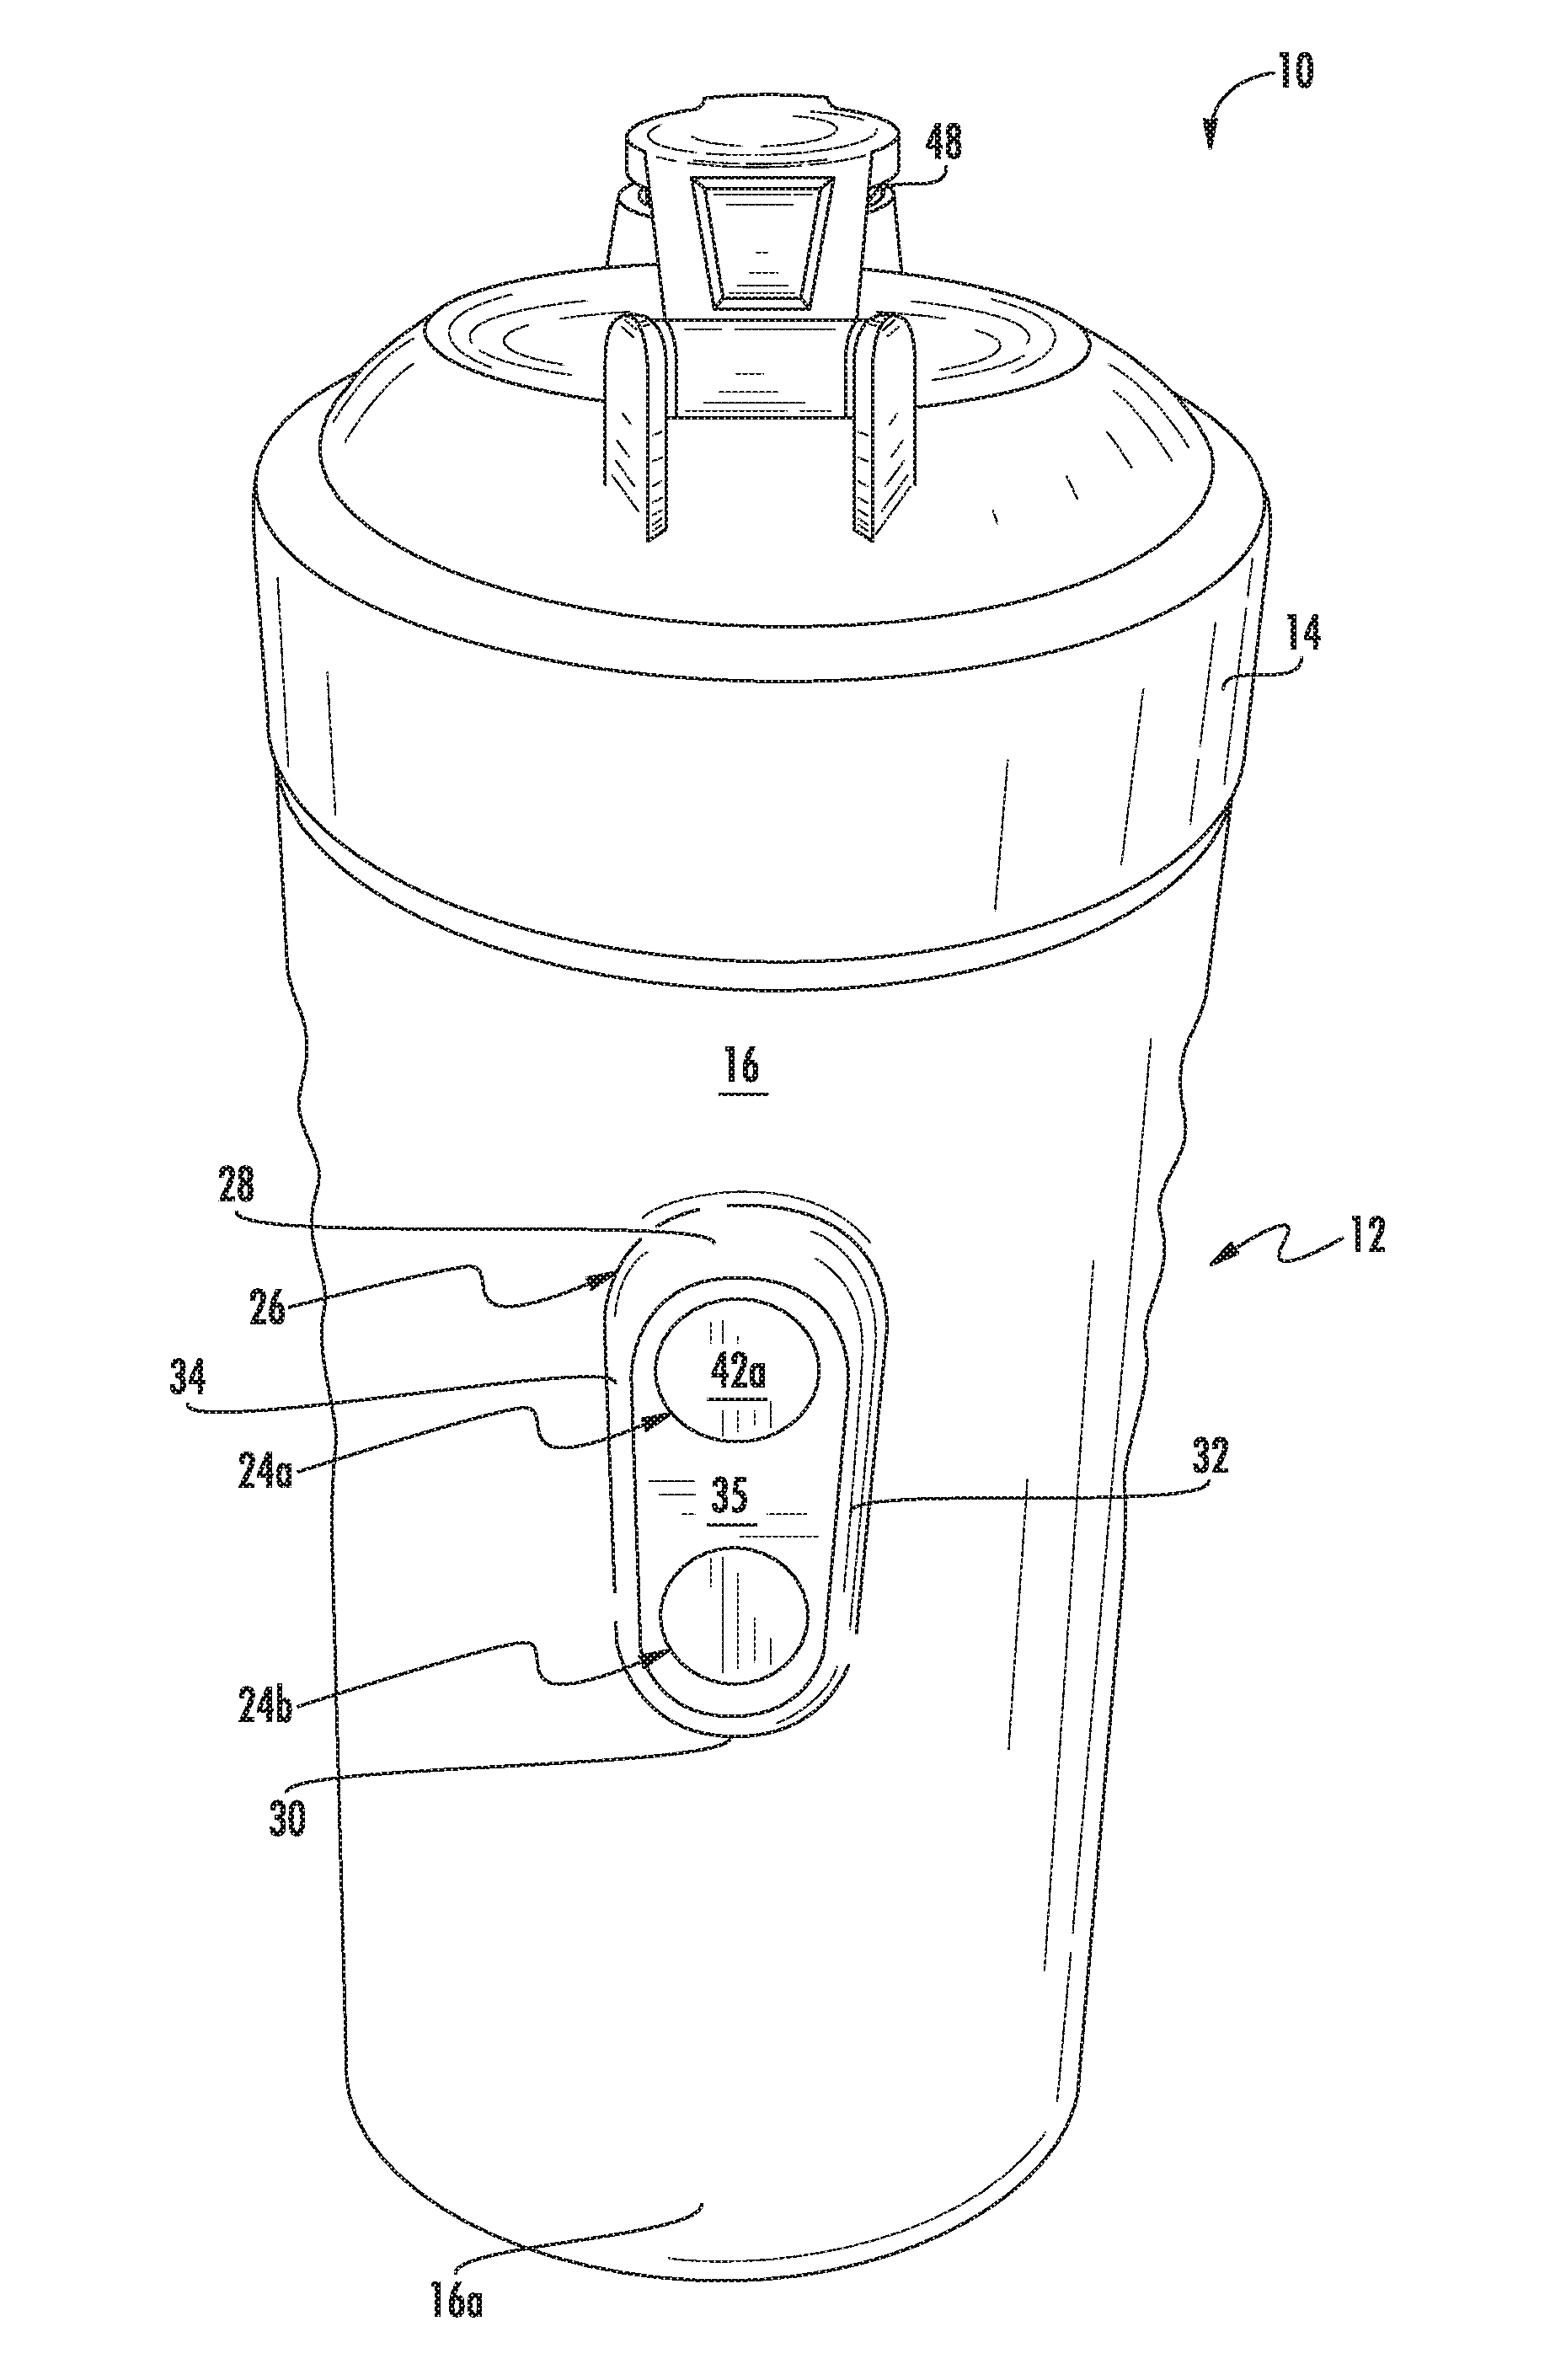 Shaker bottle with magnetic elements for temporary securement to exercise equipment